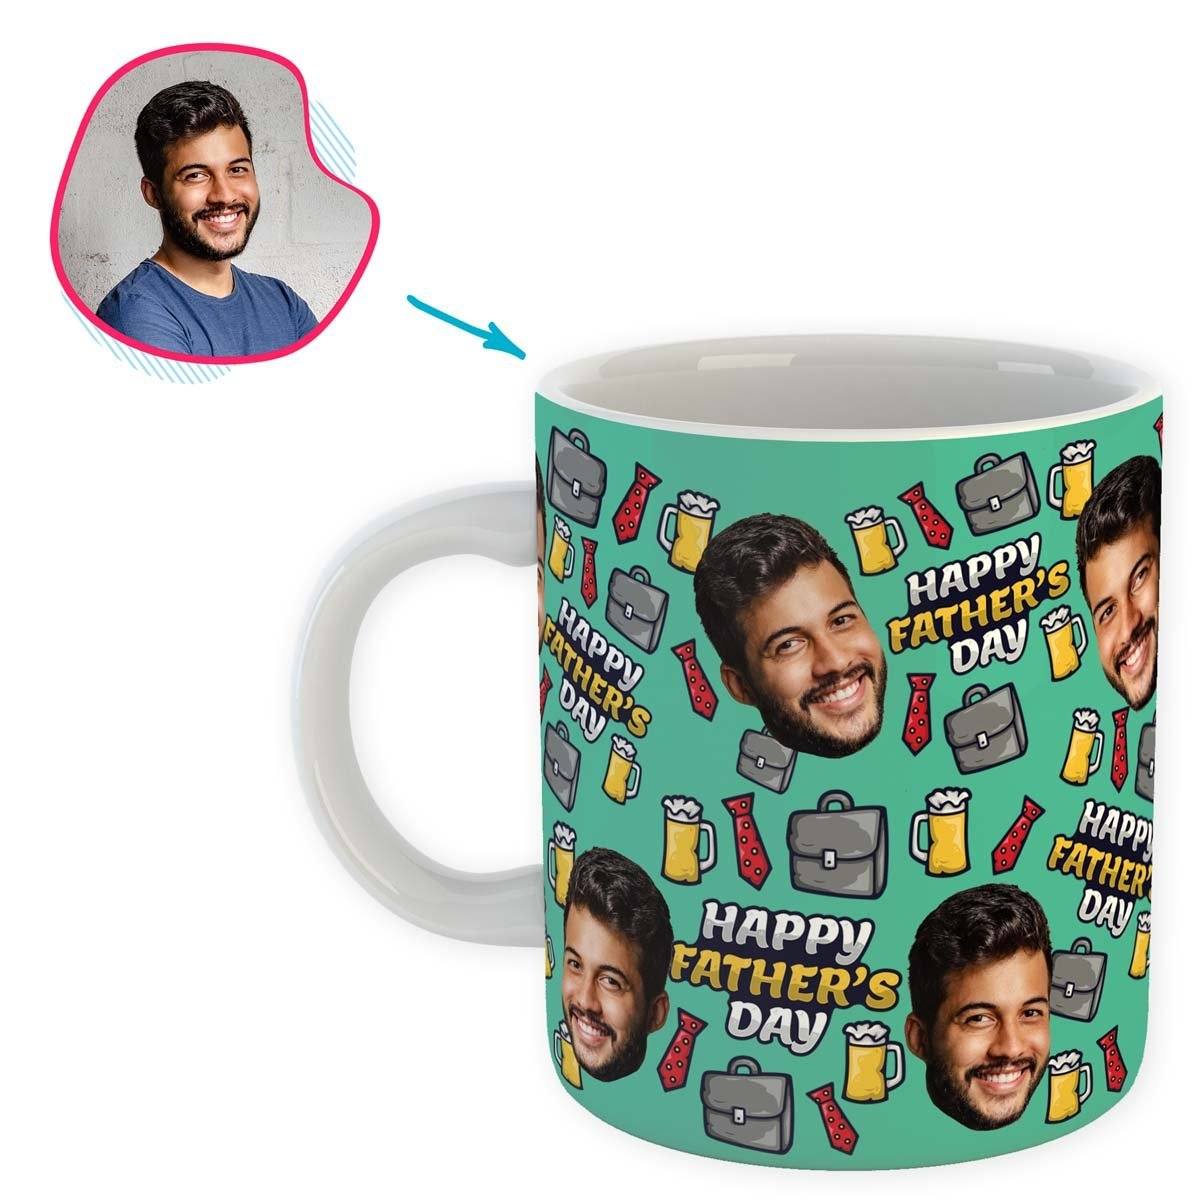 Mint Fathers Day personalized mug with photo of face printed on it